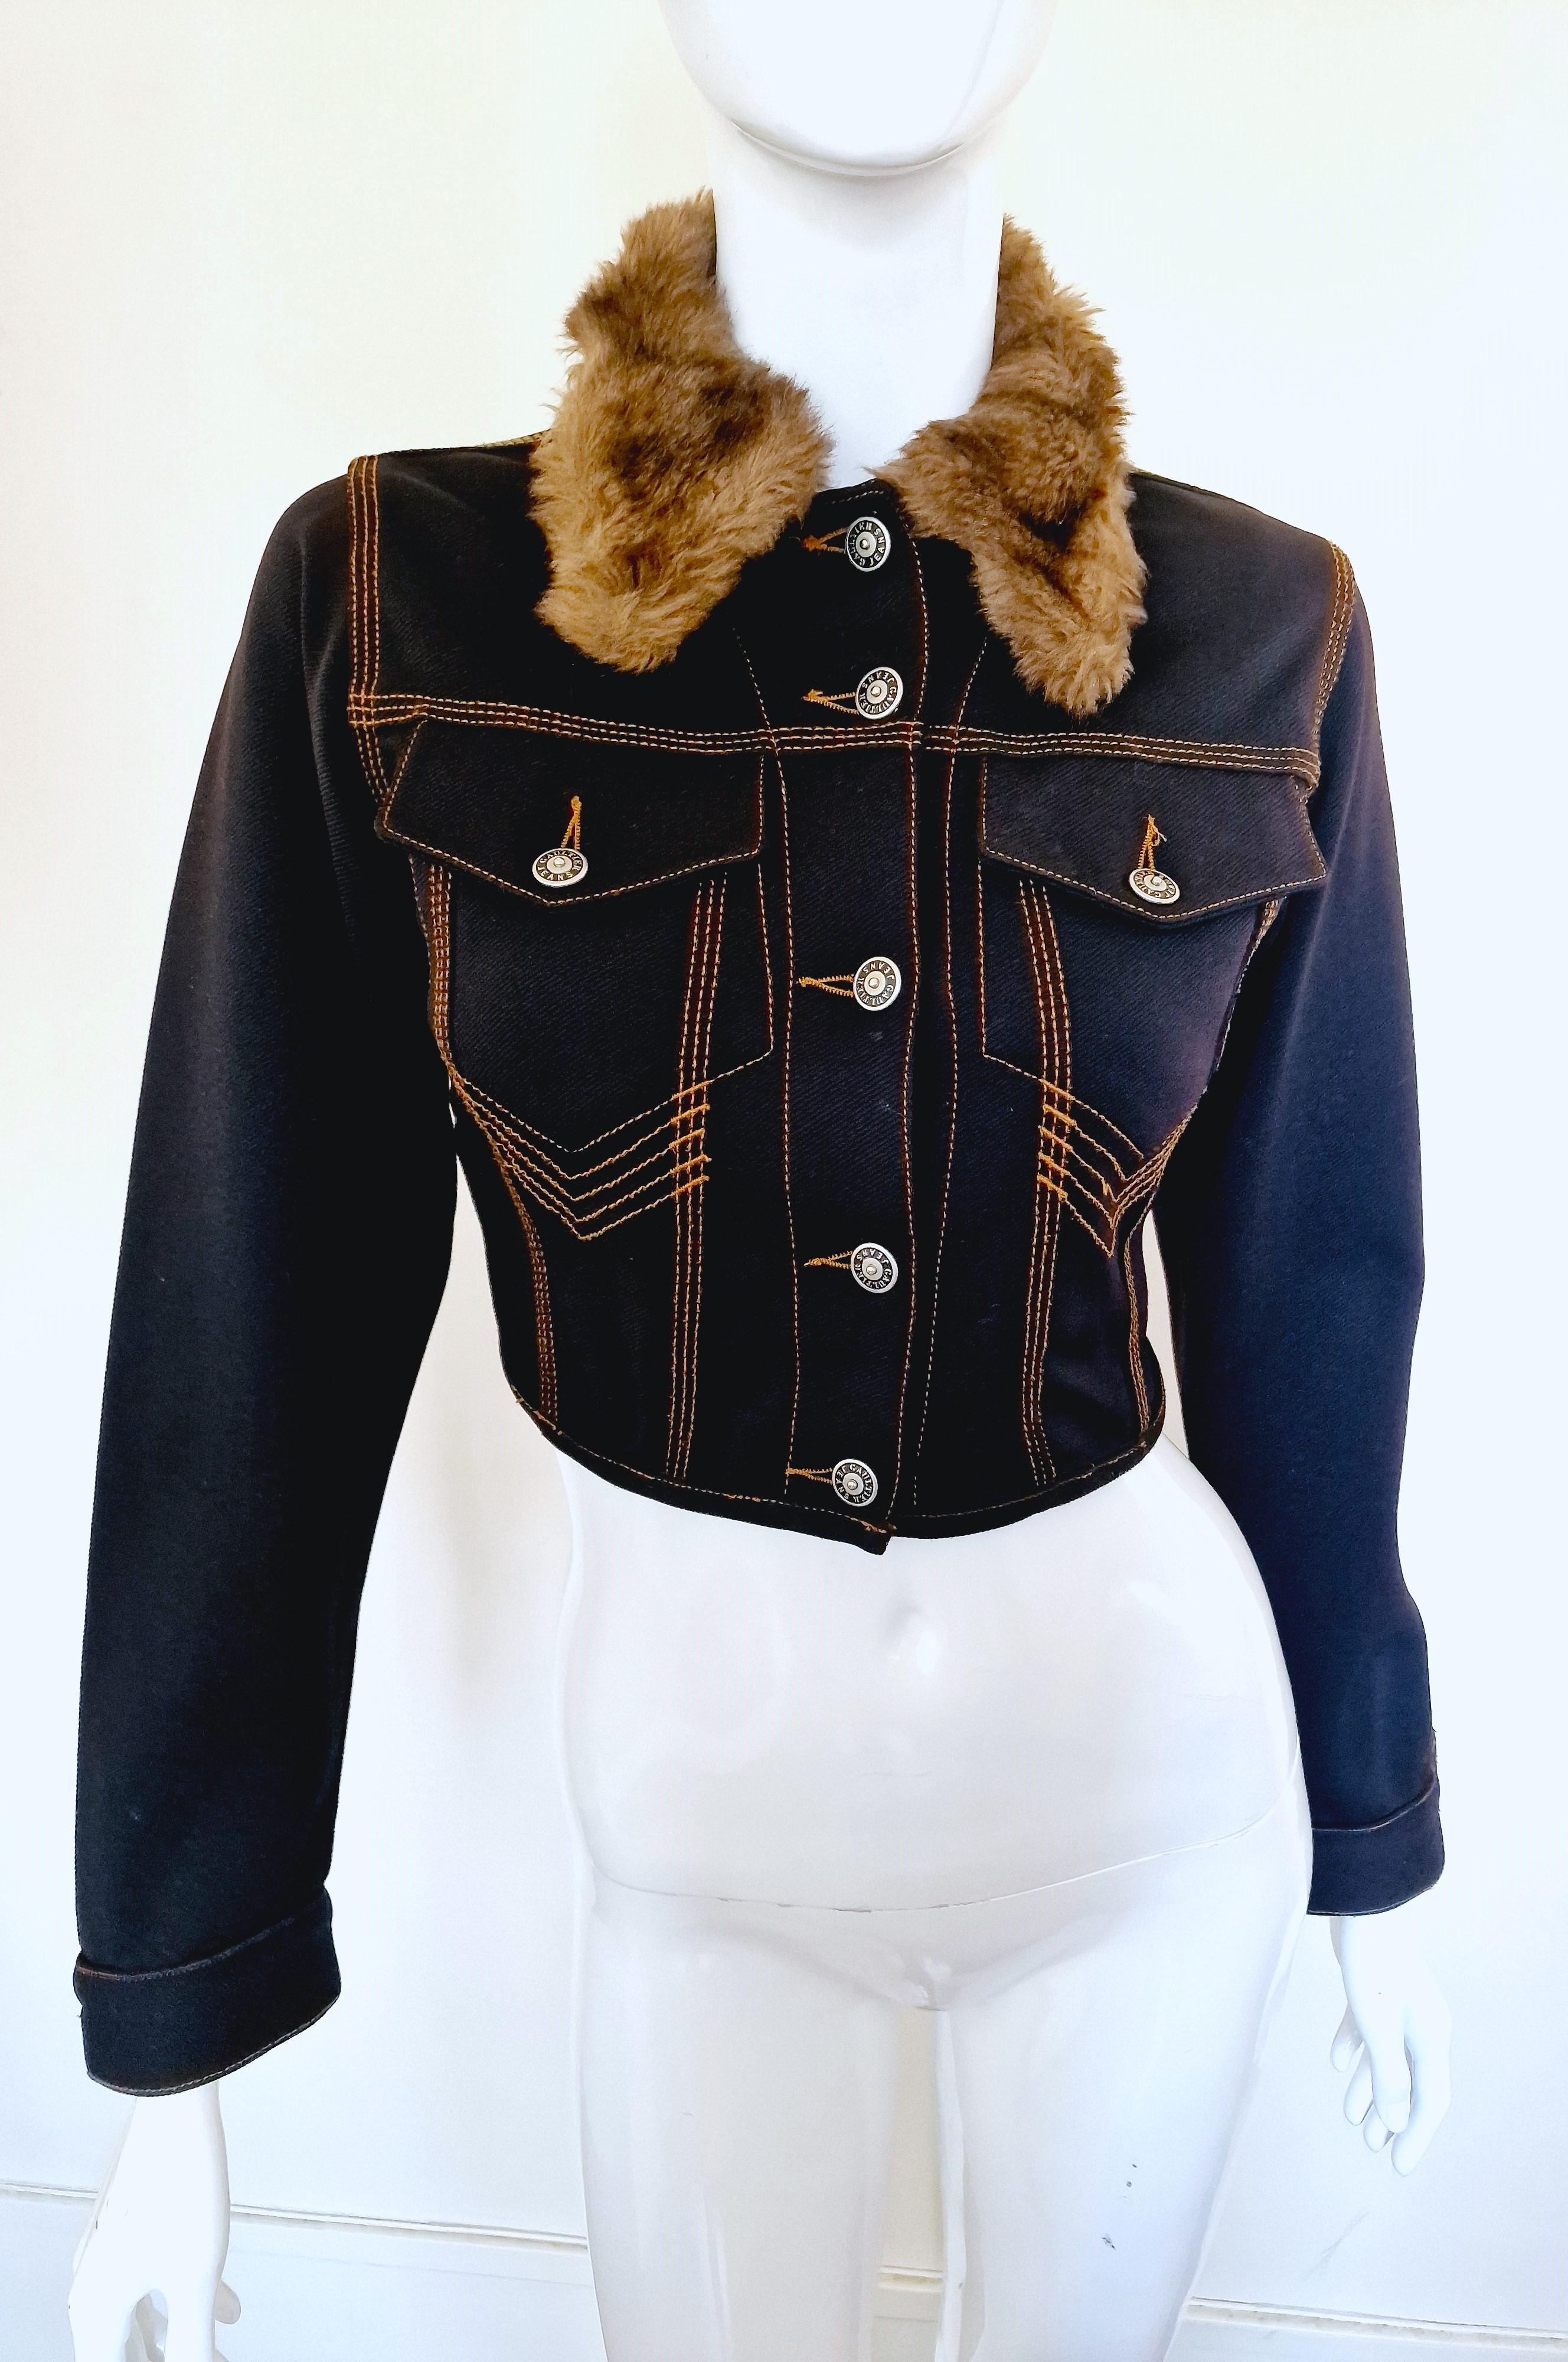 Crop jacket by Jean Paul Gaultier!
The fake fur collar can be buttoned up!
2 front pockets.
*GAULTIER JEANS* metal buttons.

VERY GOOD condition!

SIZE
Marked size: S.
Fits from XS to small.
Length: 39 cm / 15.3 inch
Bust: 42 cm / 16.5 inch
Waist: